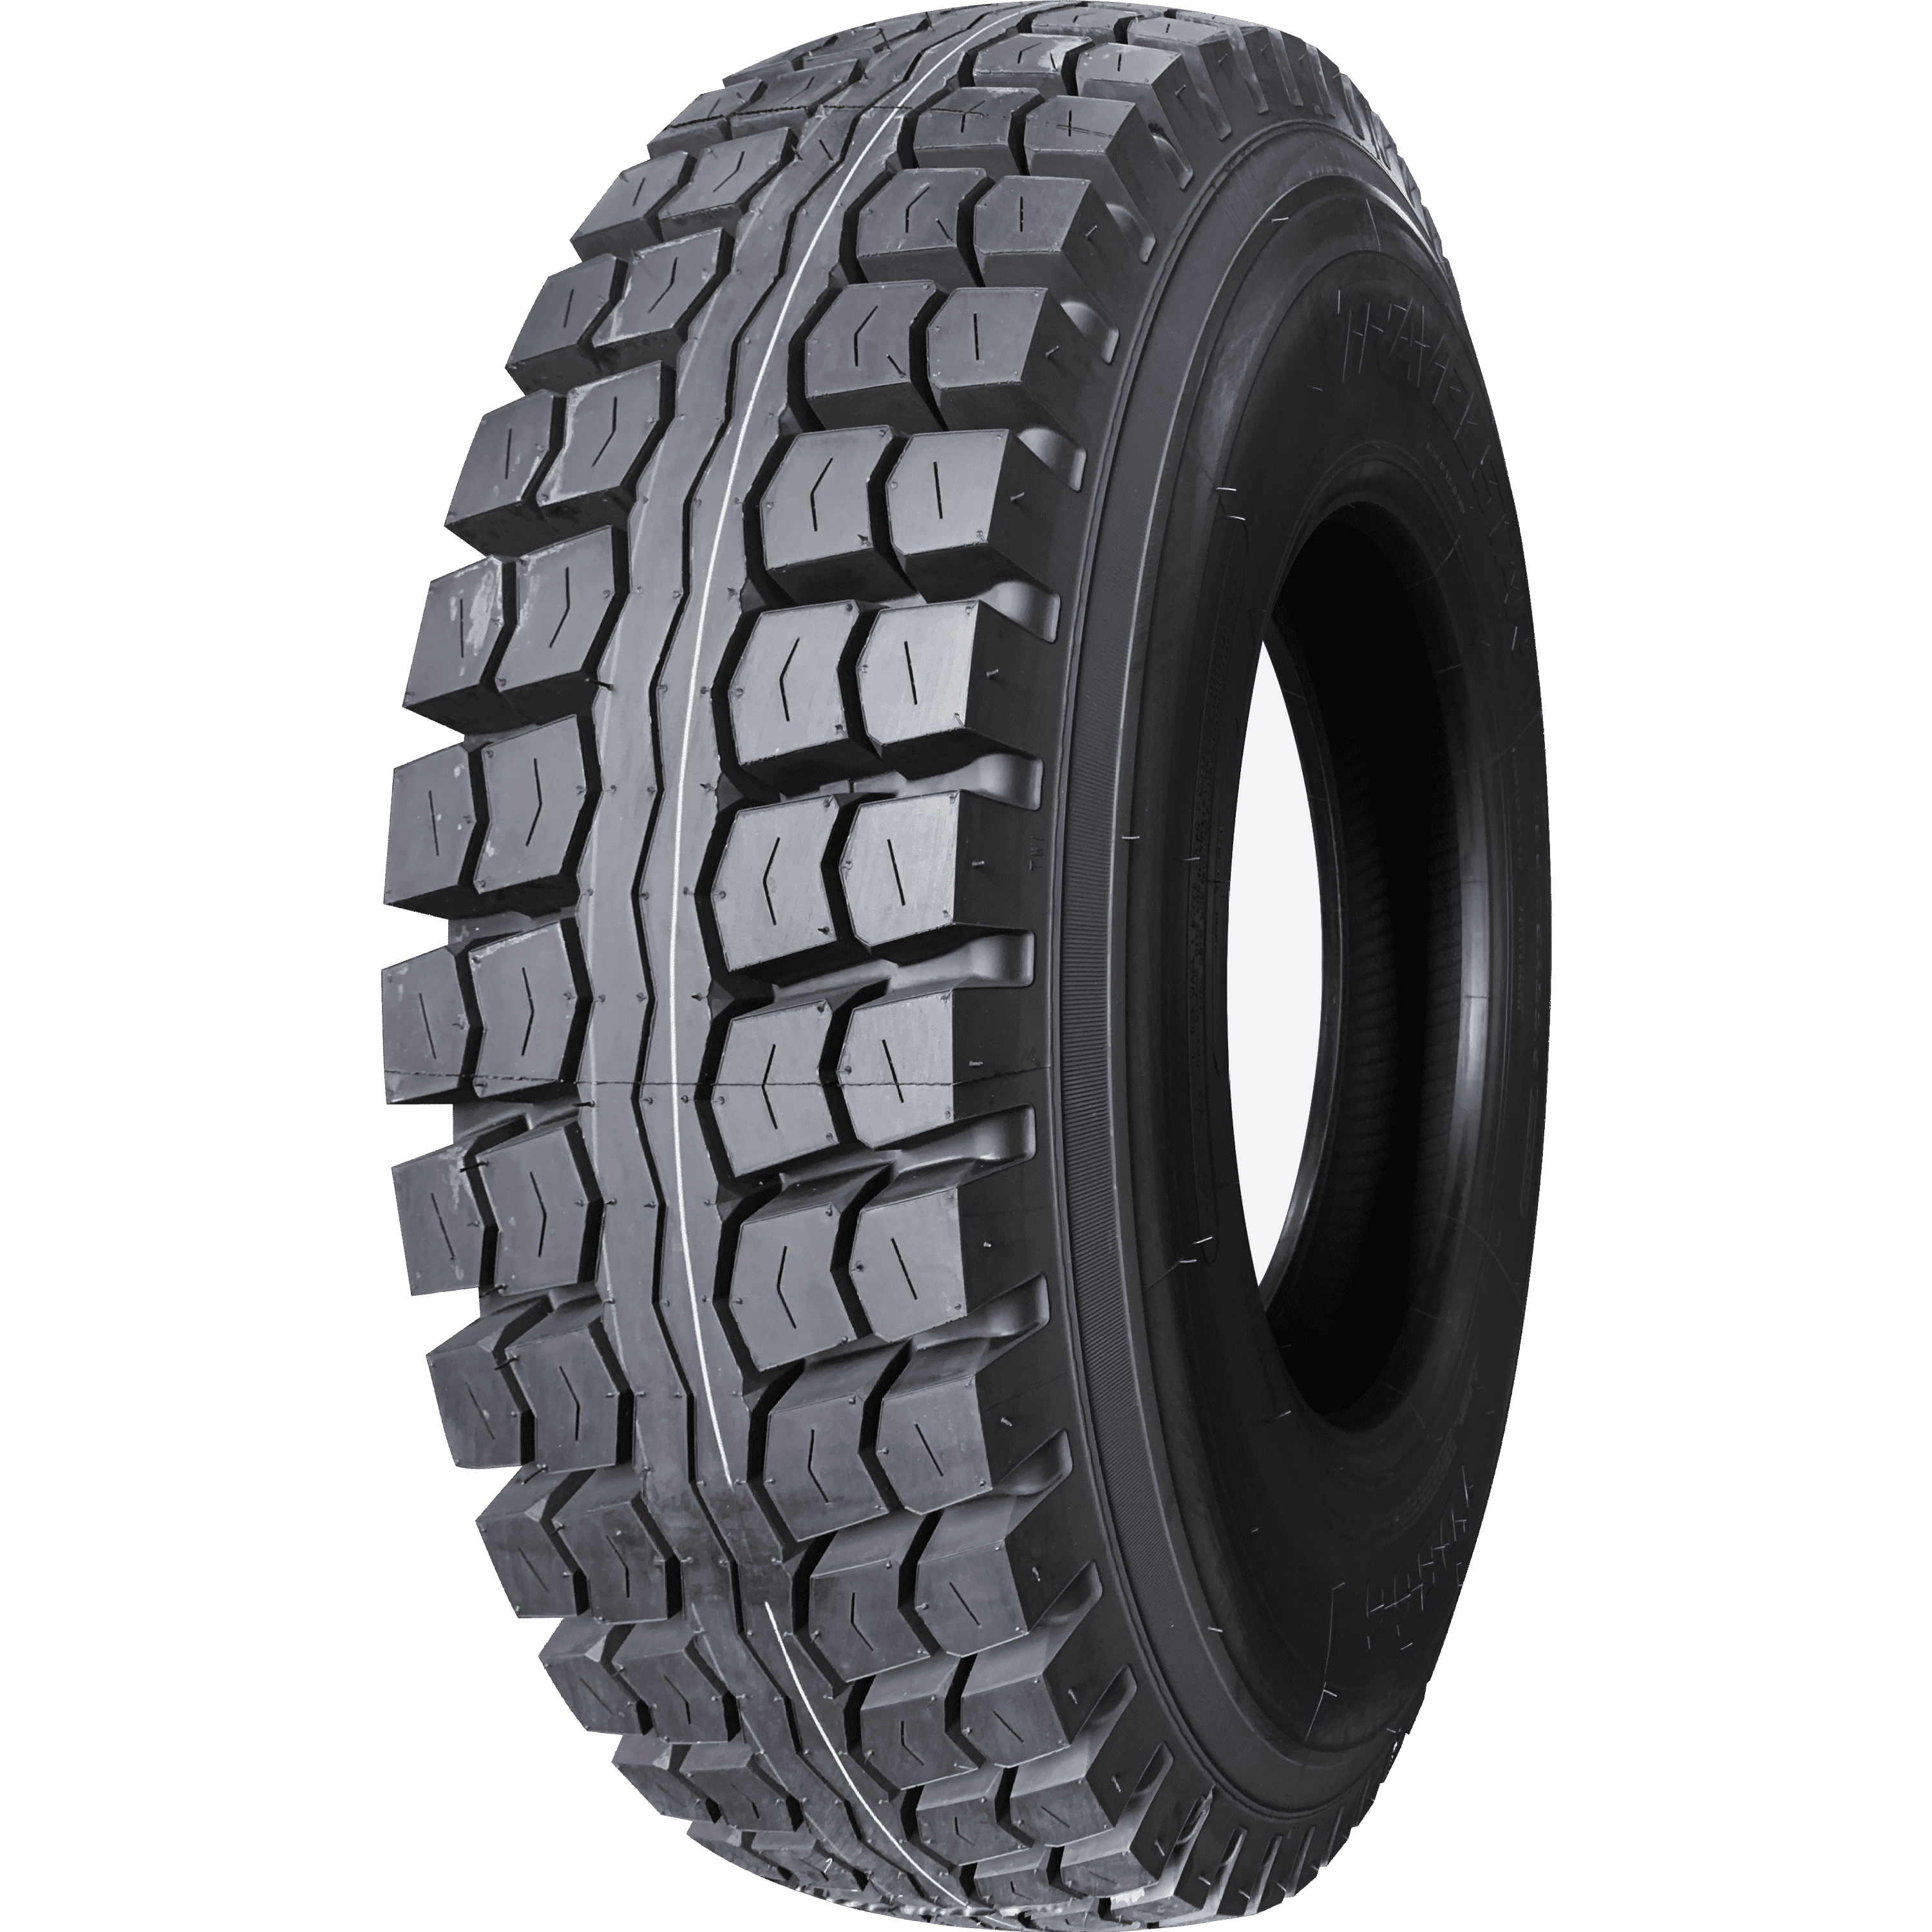 Maxxis Bighorn 2.0 Radial Tire 30x10-14 for Can-Am Maverick X3 X RS Turbo R 2017-2018 